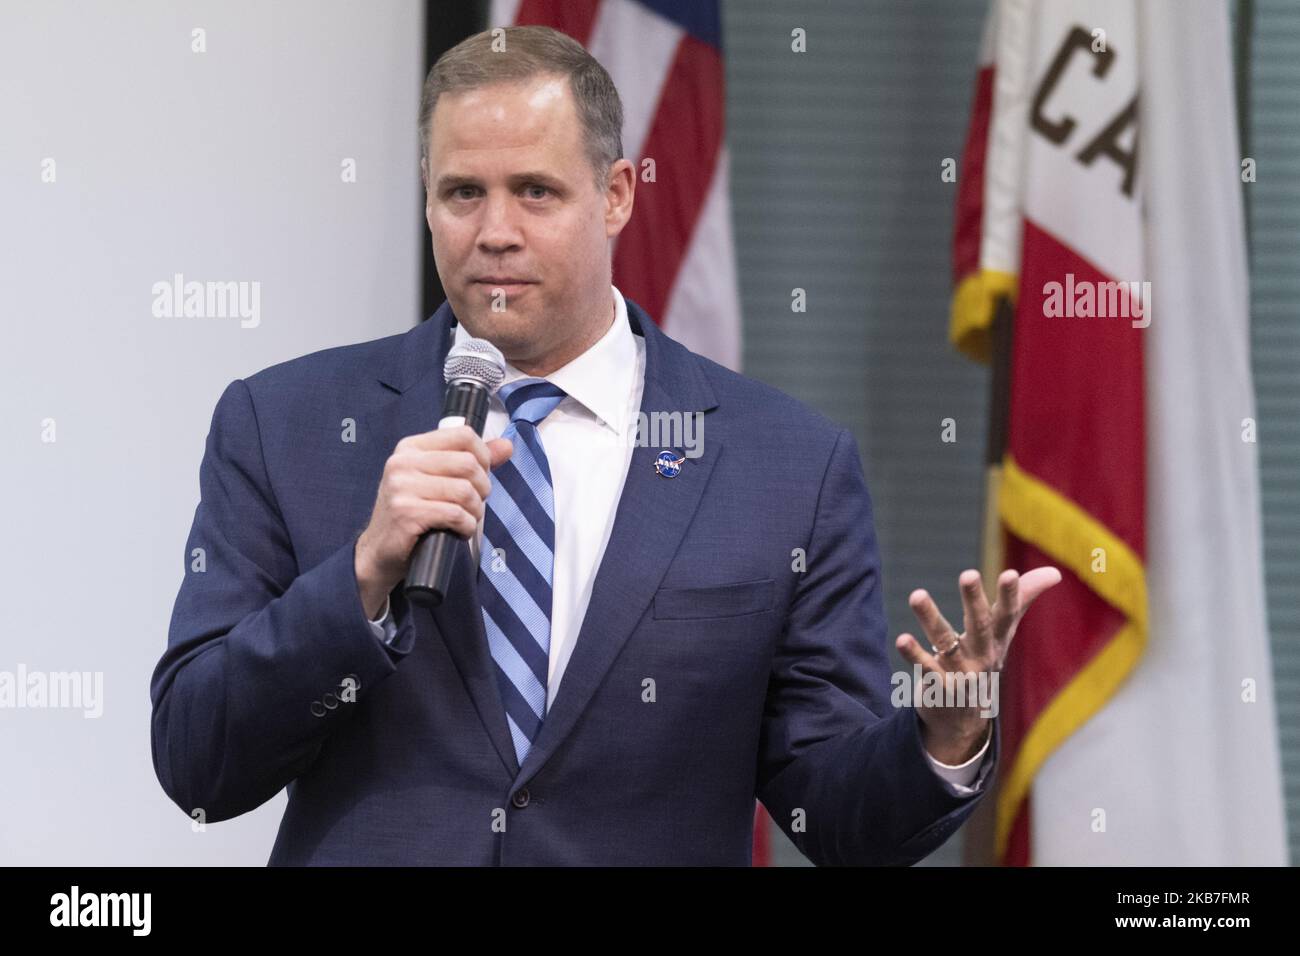 Jim Bridenstine, administrator of the National Aeronautics and Space Administration (NASA), is making a speech during the Women's Equality Day Panel at NASA Ames Research Center in Mountain View, California on August 26, 2019. (Photo by Yichuan Cao/NurPhoto) (Photo by Yichuan Cao/NurPhoto) Stock Photo